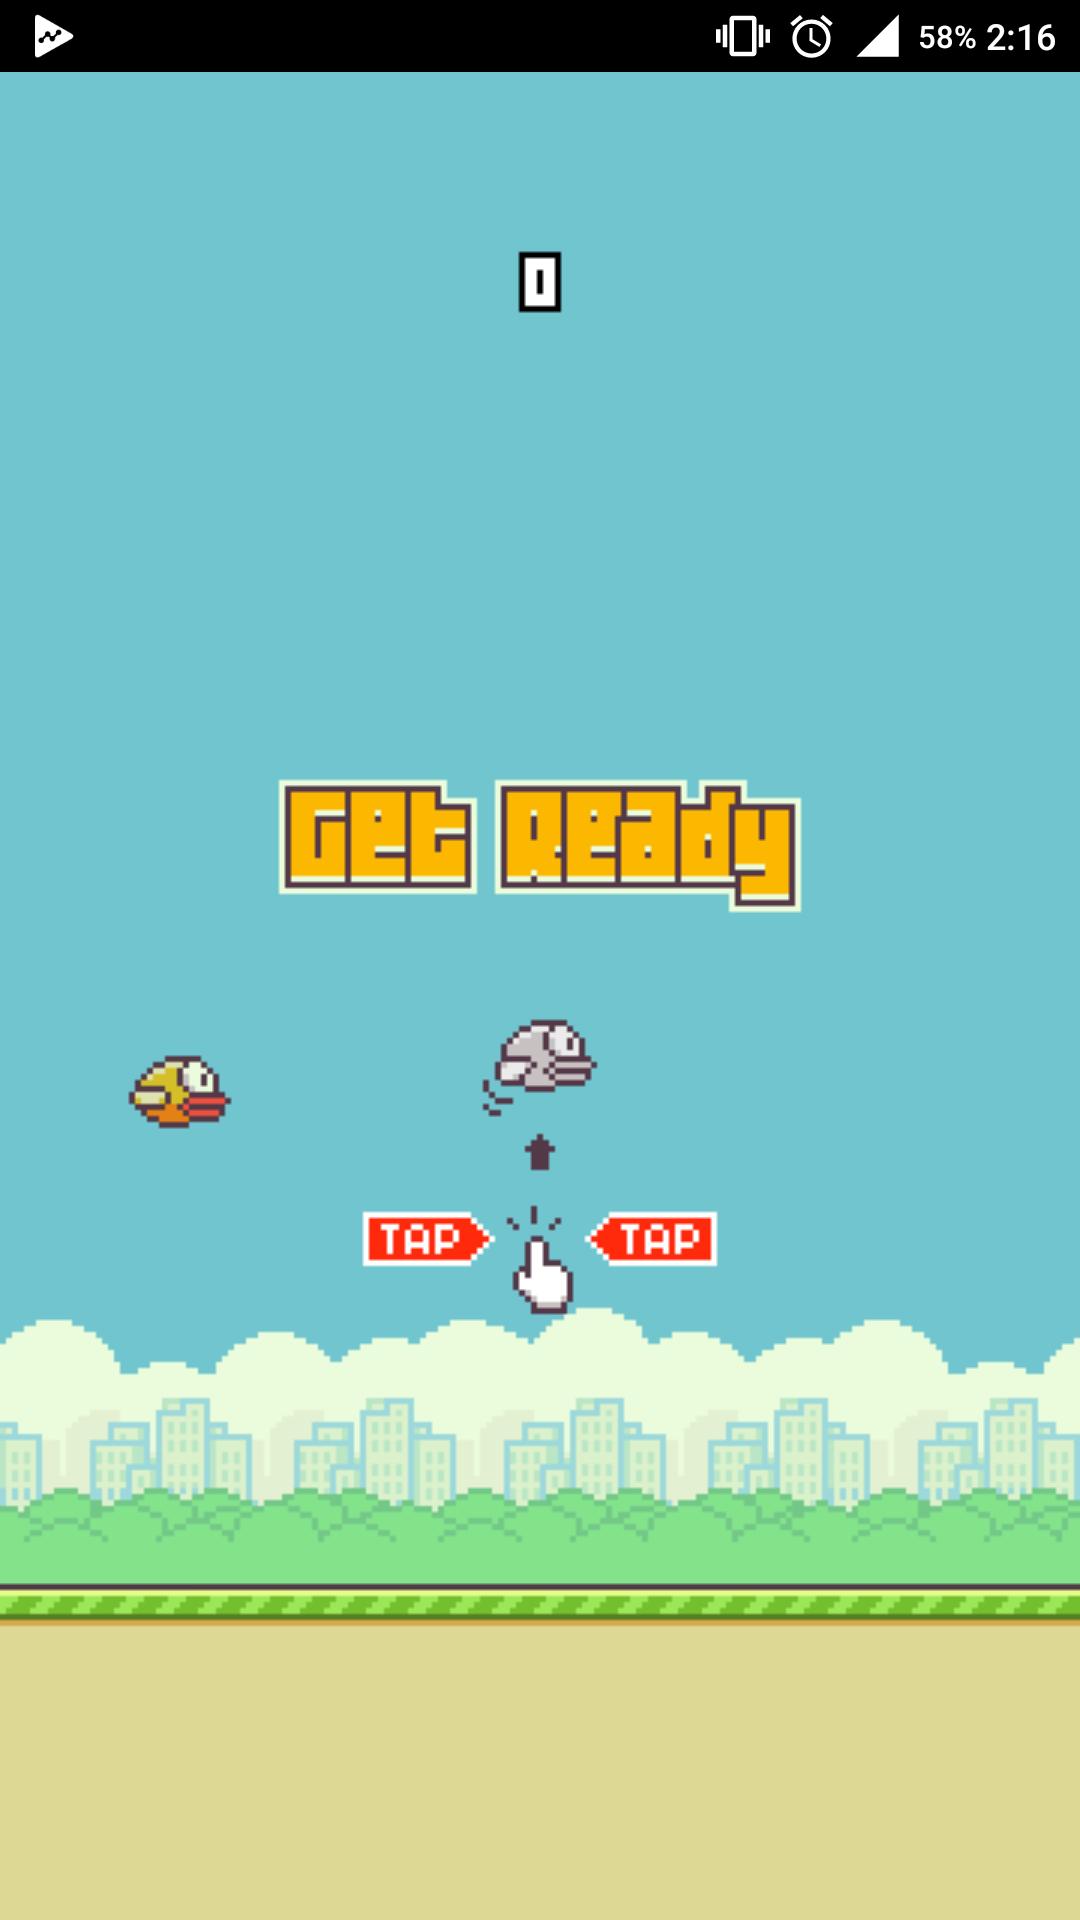 Flappy Bird for Android - APK Download